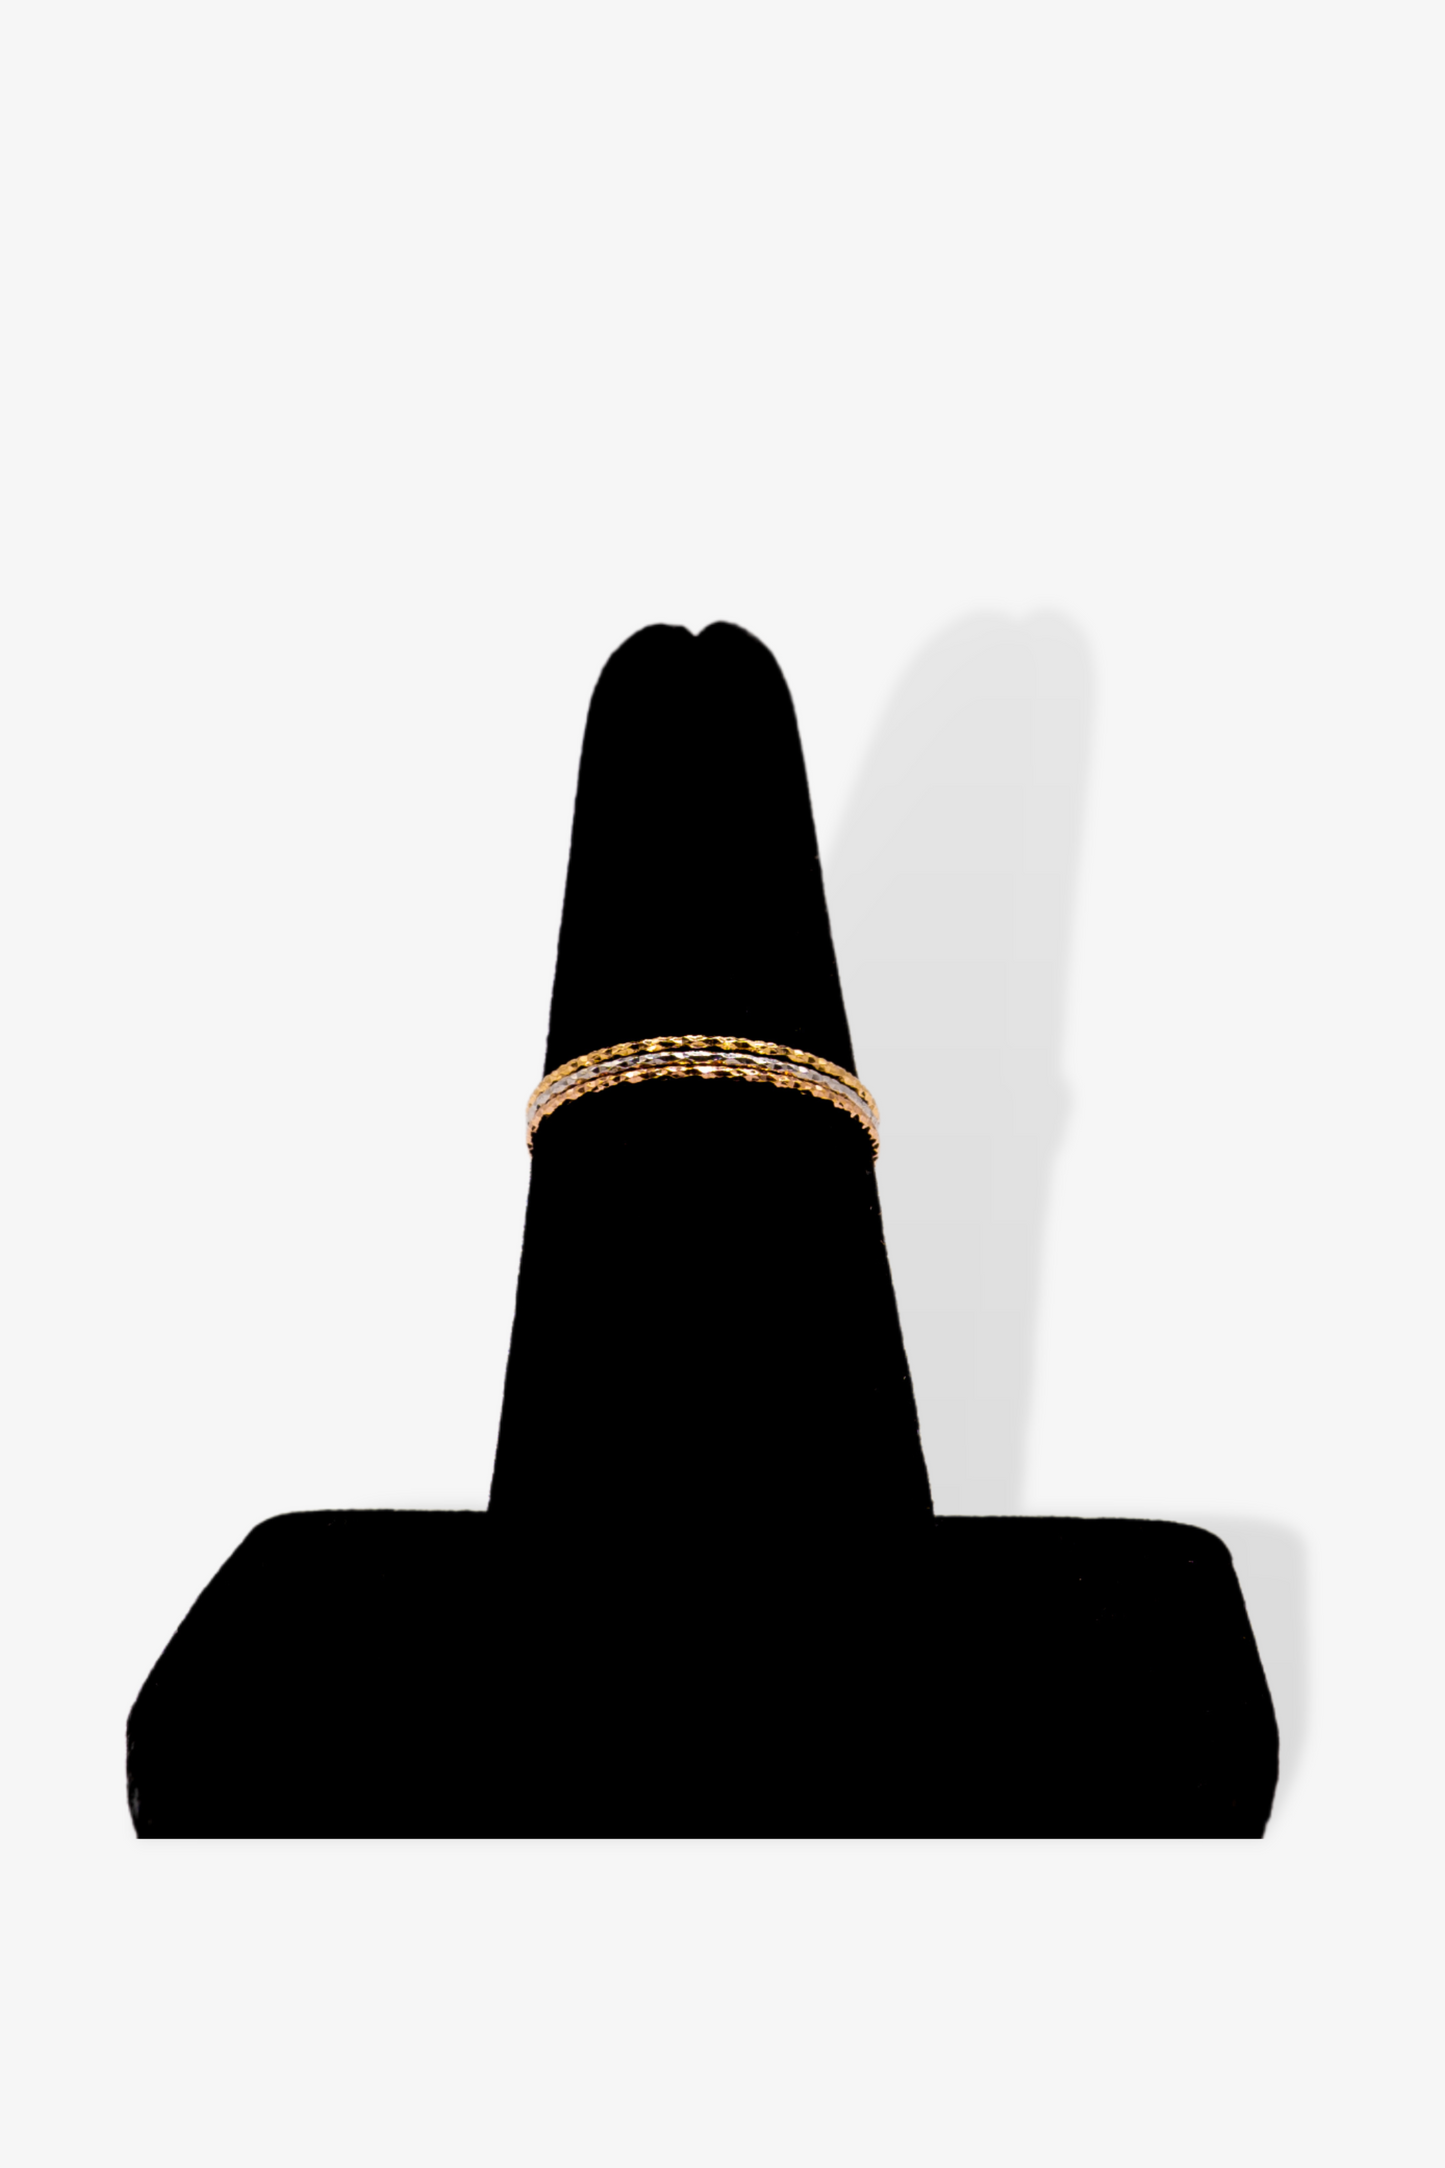 Stackable 14k REAL Gold Rings